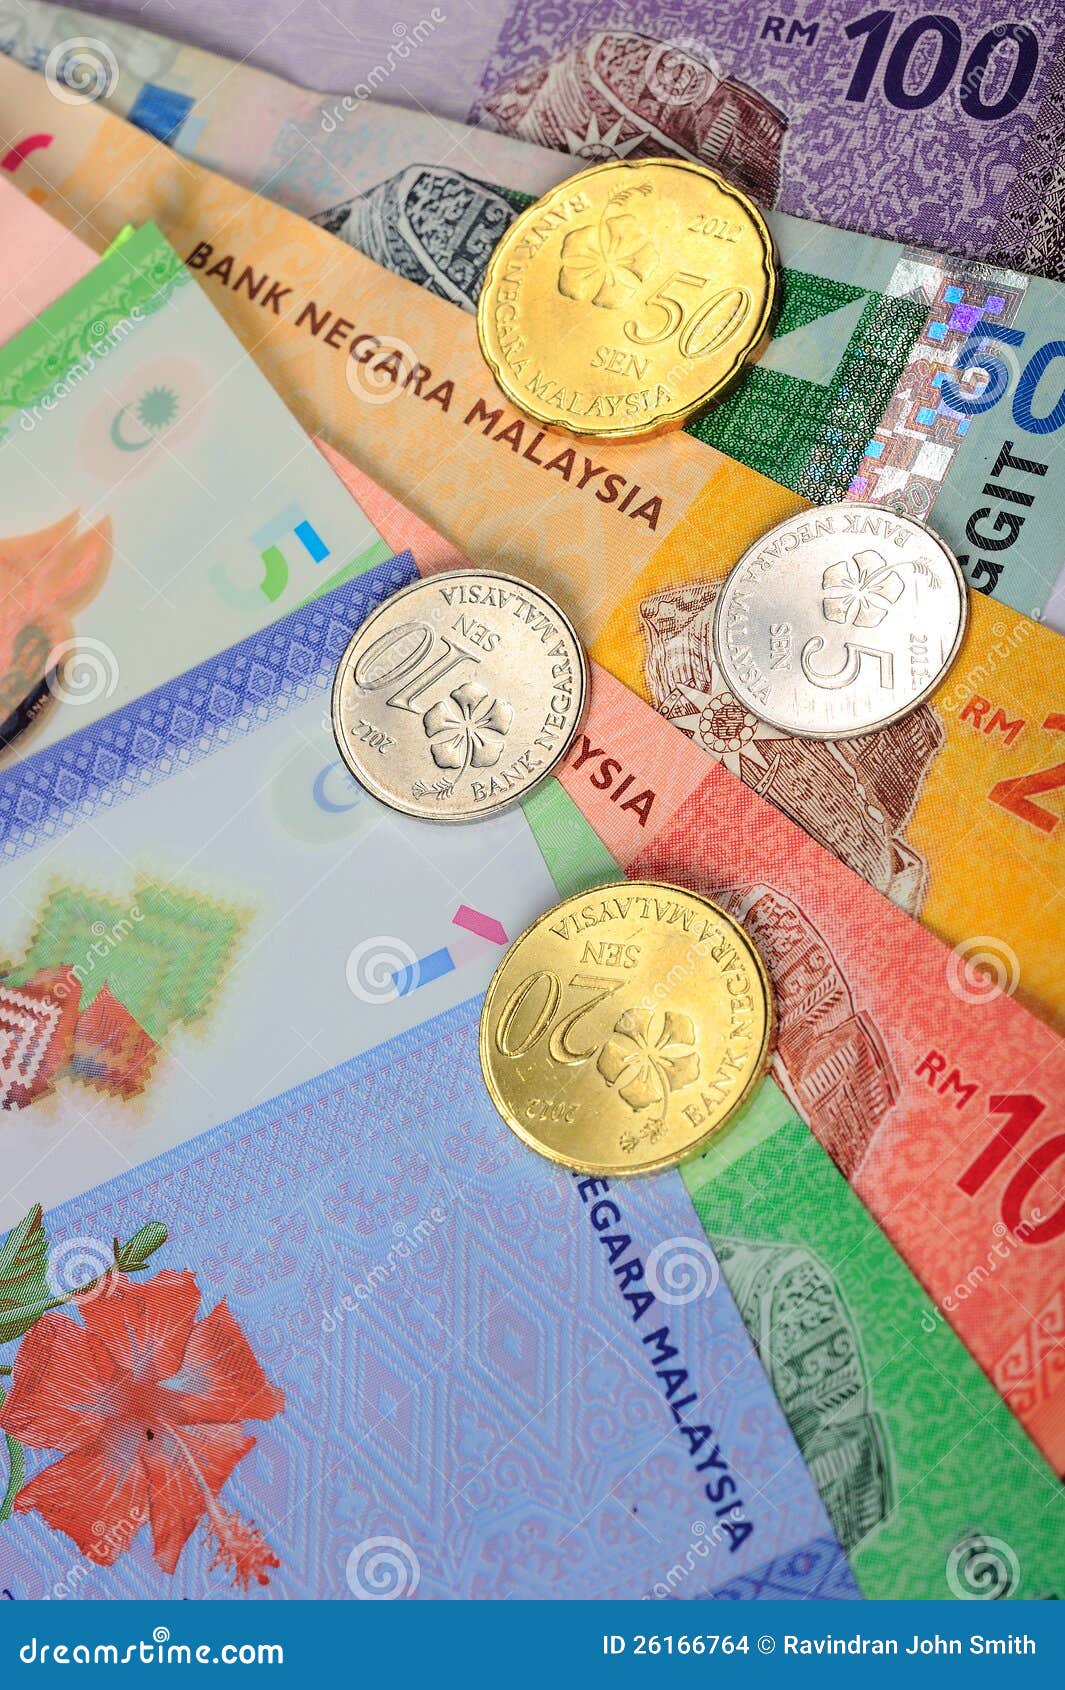 Malaysian Currency editorial stock image. Image of money  26166764